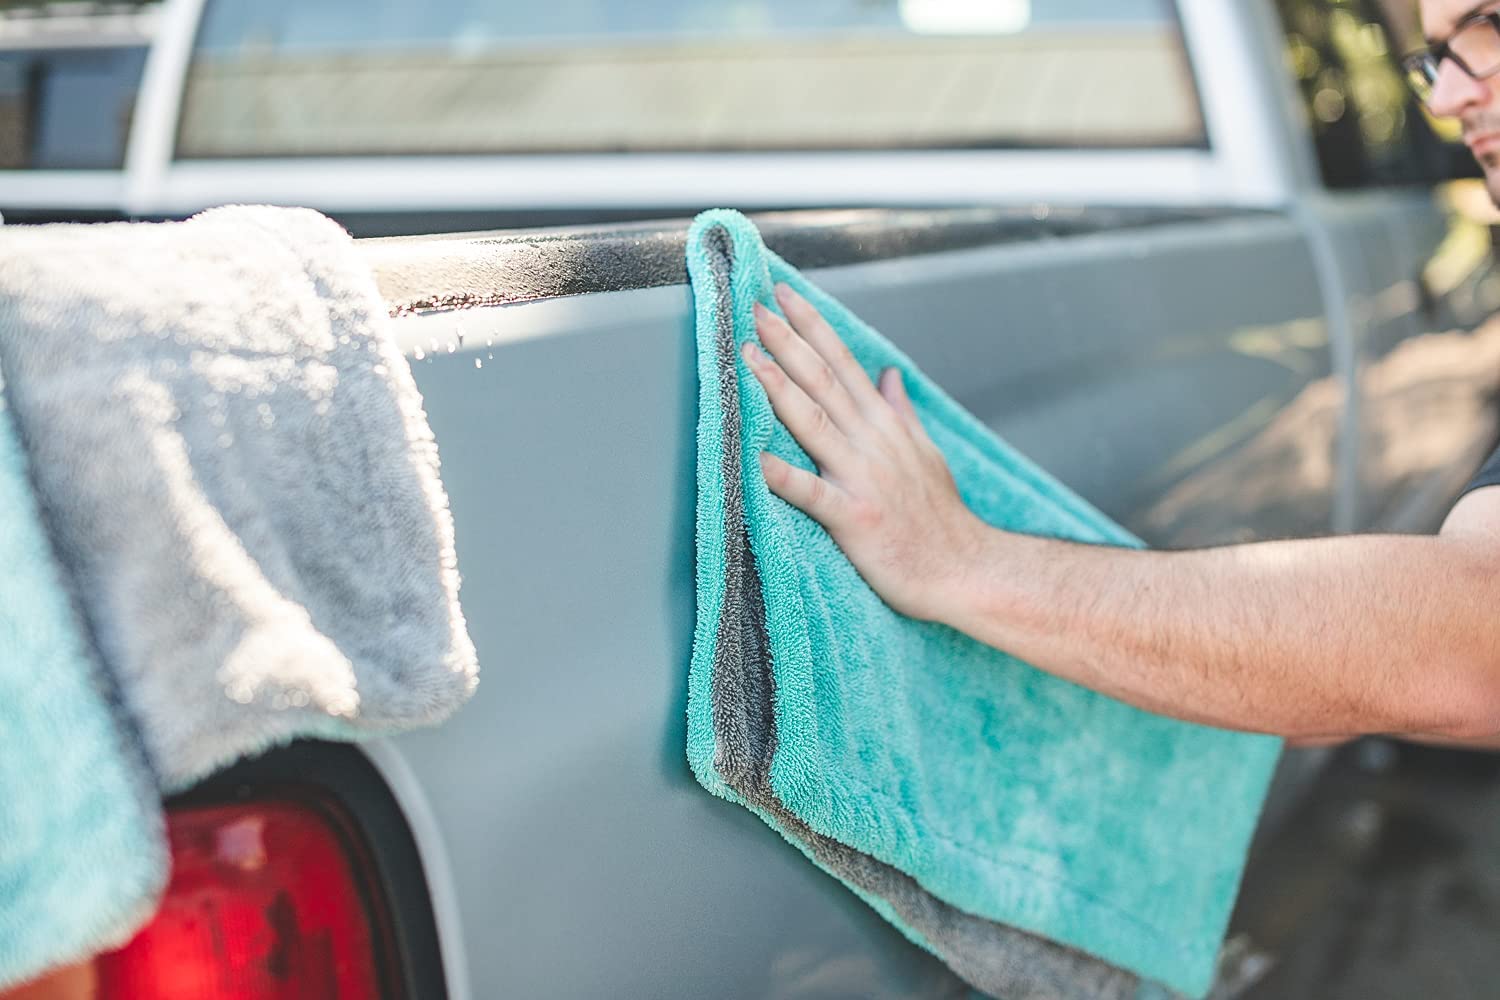 Lasyman Microfiber Towels for Cars-Extra Thick Car Drying Towel ,Absorbent Car Wash Towels/Rags,Micro Fiber Clothes for Cars/Detailing/Interior